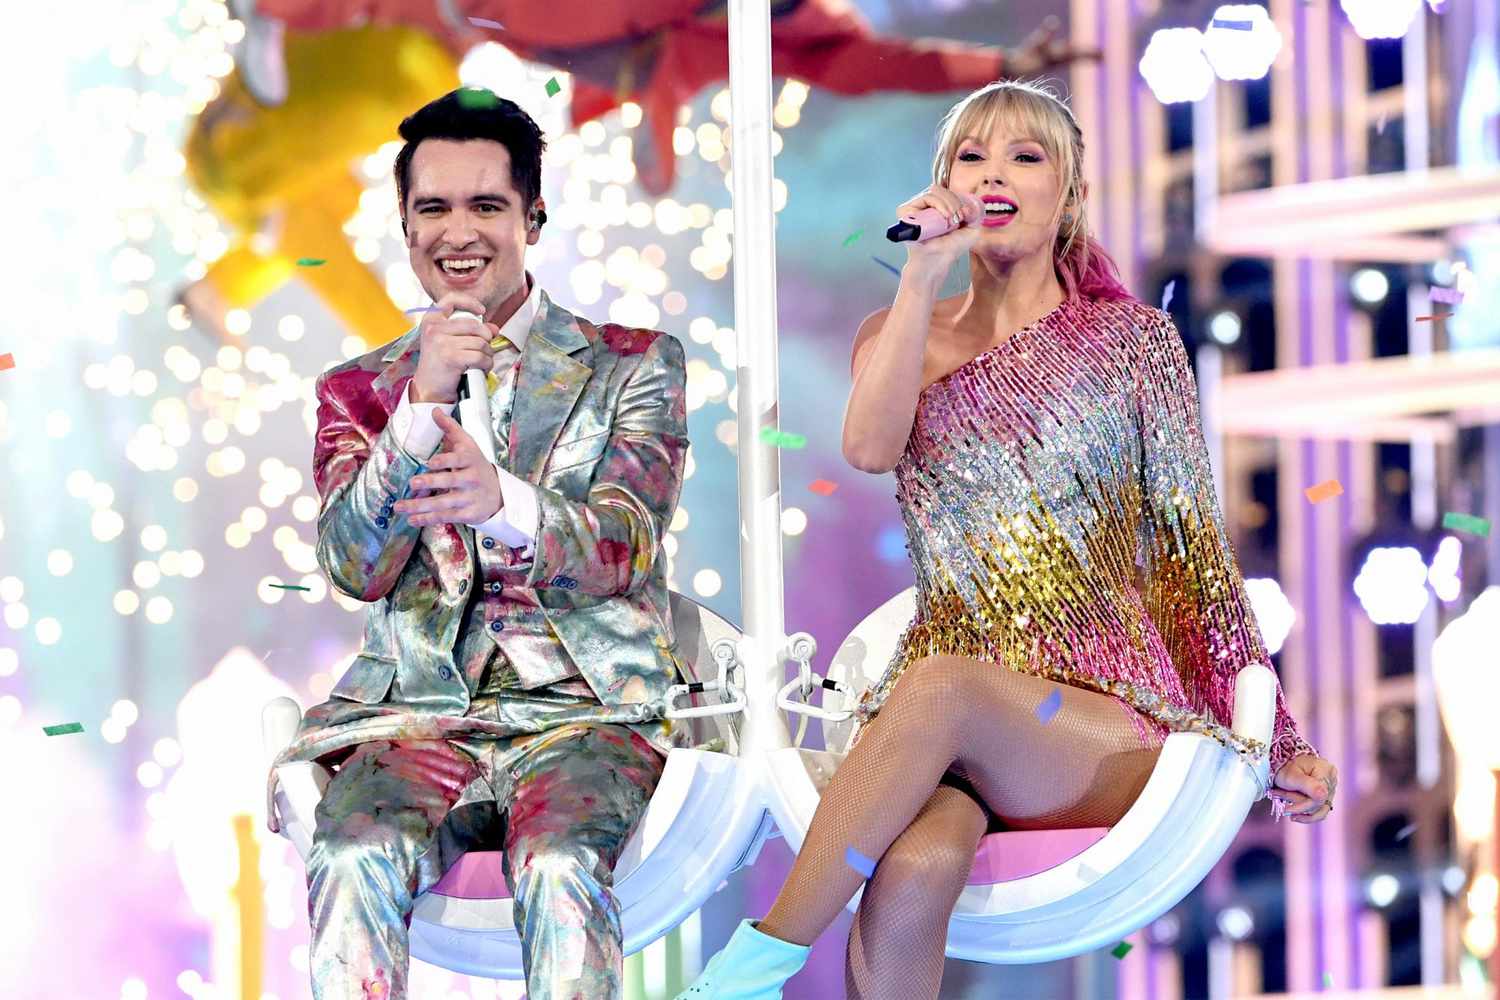 LAS VEGAS, NEVADA - MAY 01: (L-R) Brendon Urie of Panic! at the Disco and Taylor Swift perform onstage during the 2019 Billboard Music Awards at MGM Grand Garden Arena on May 01, 2019 in Las Vegas, Nevada. (Photo by Kevin Winter/Getty Images for dcp)